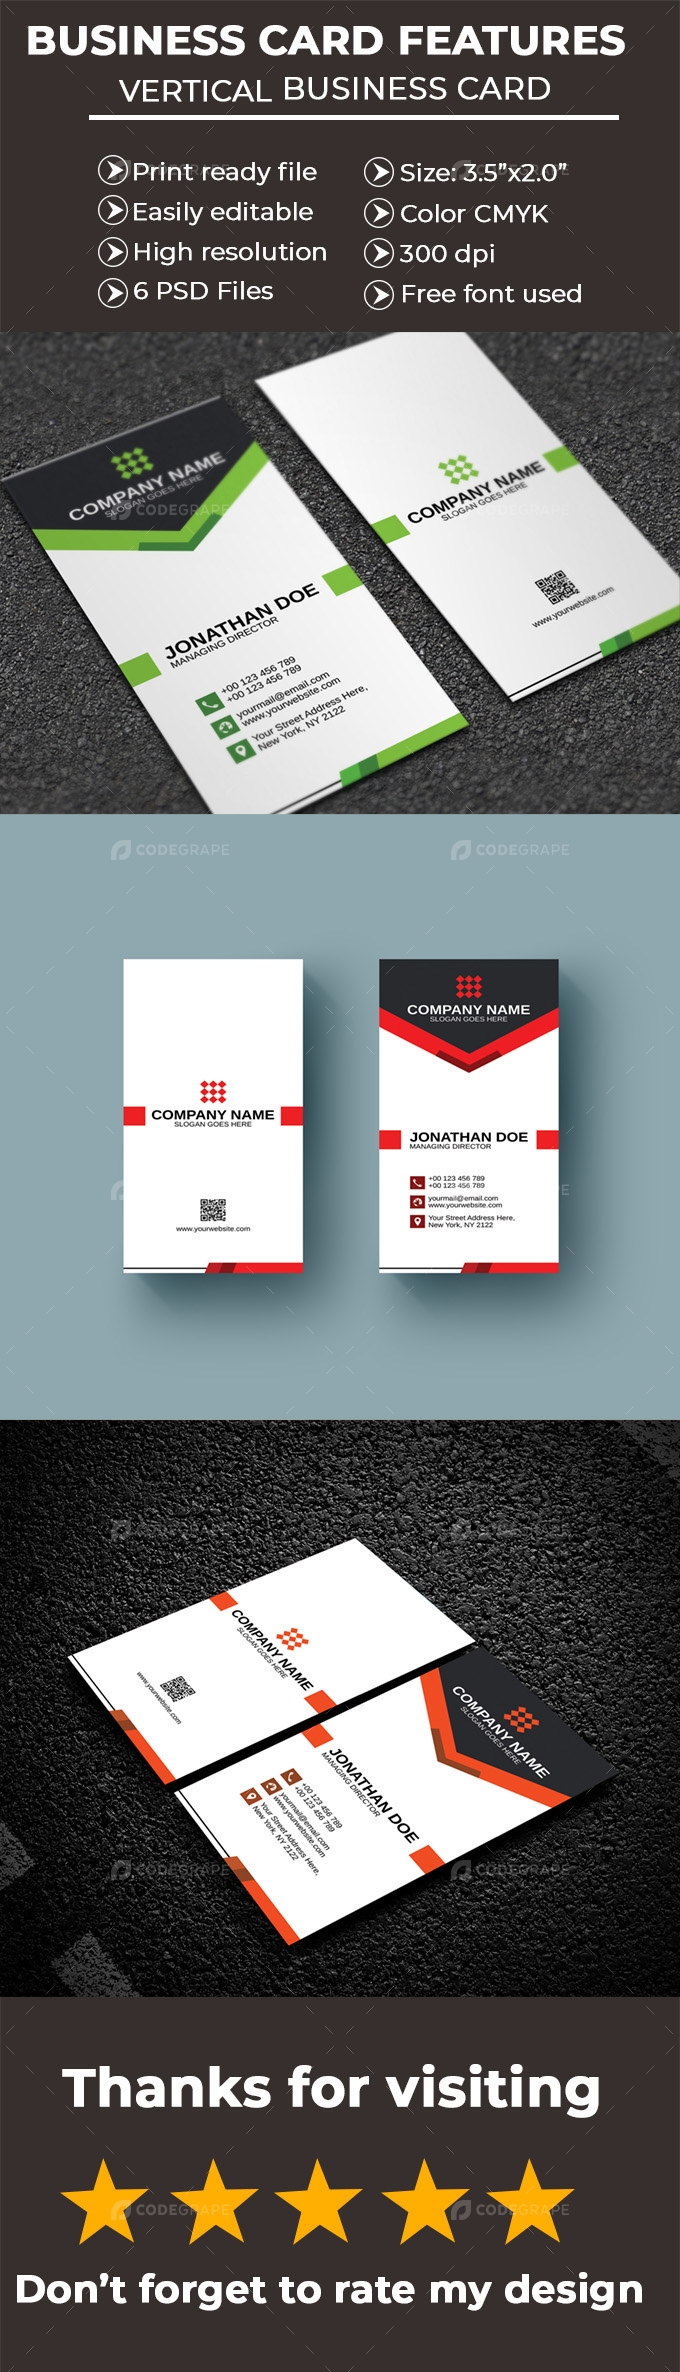 Verticle Business Card